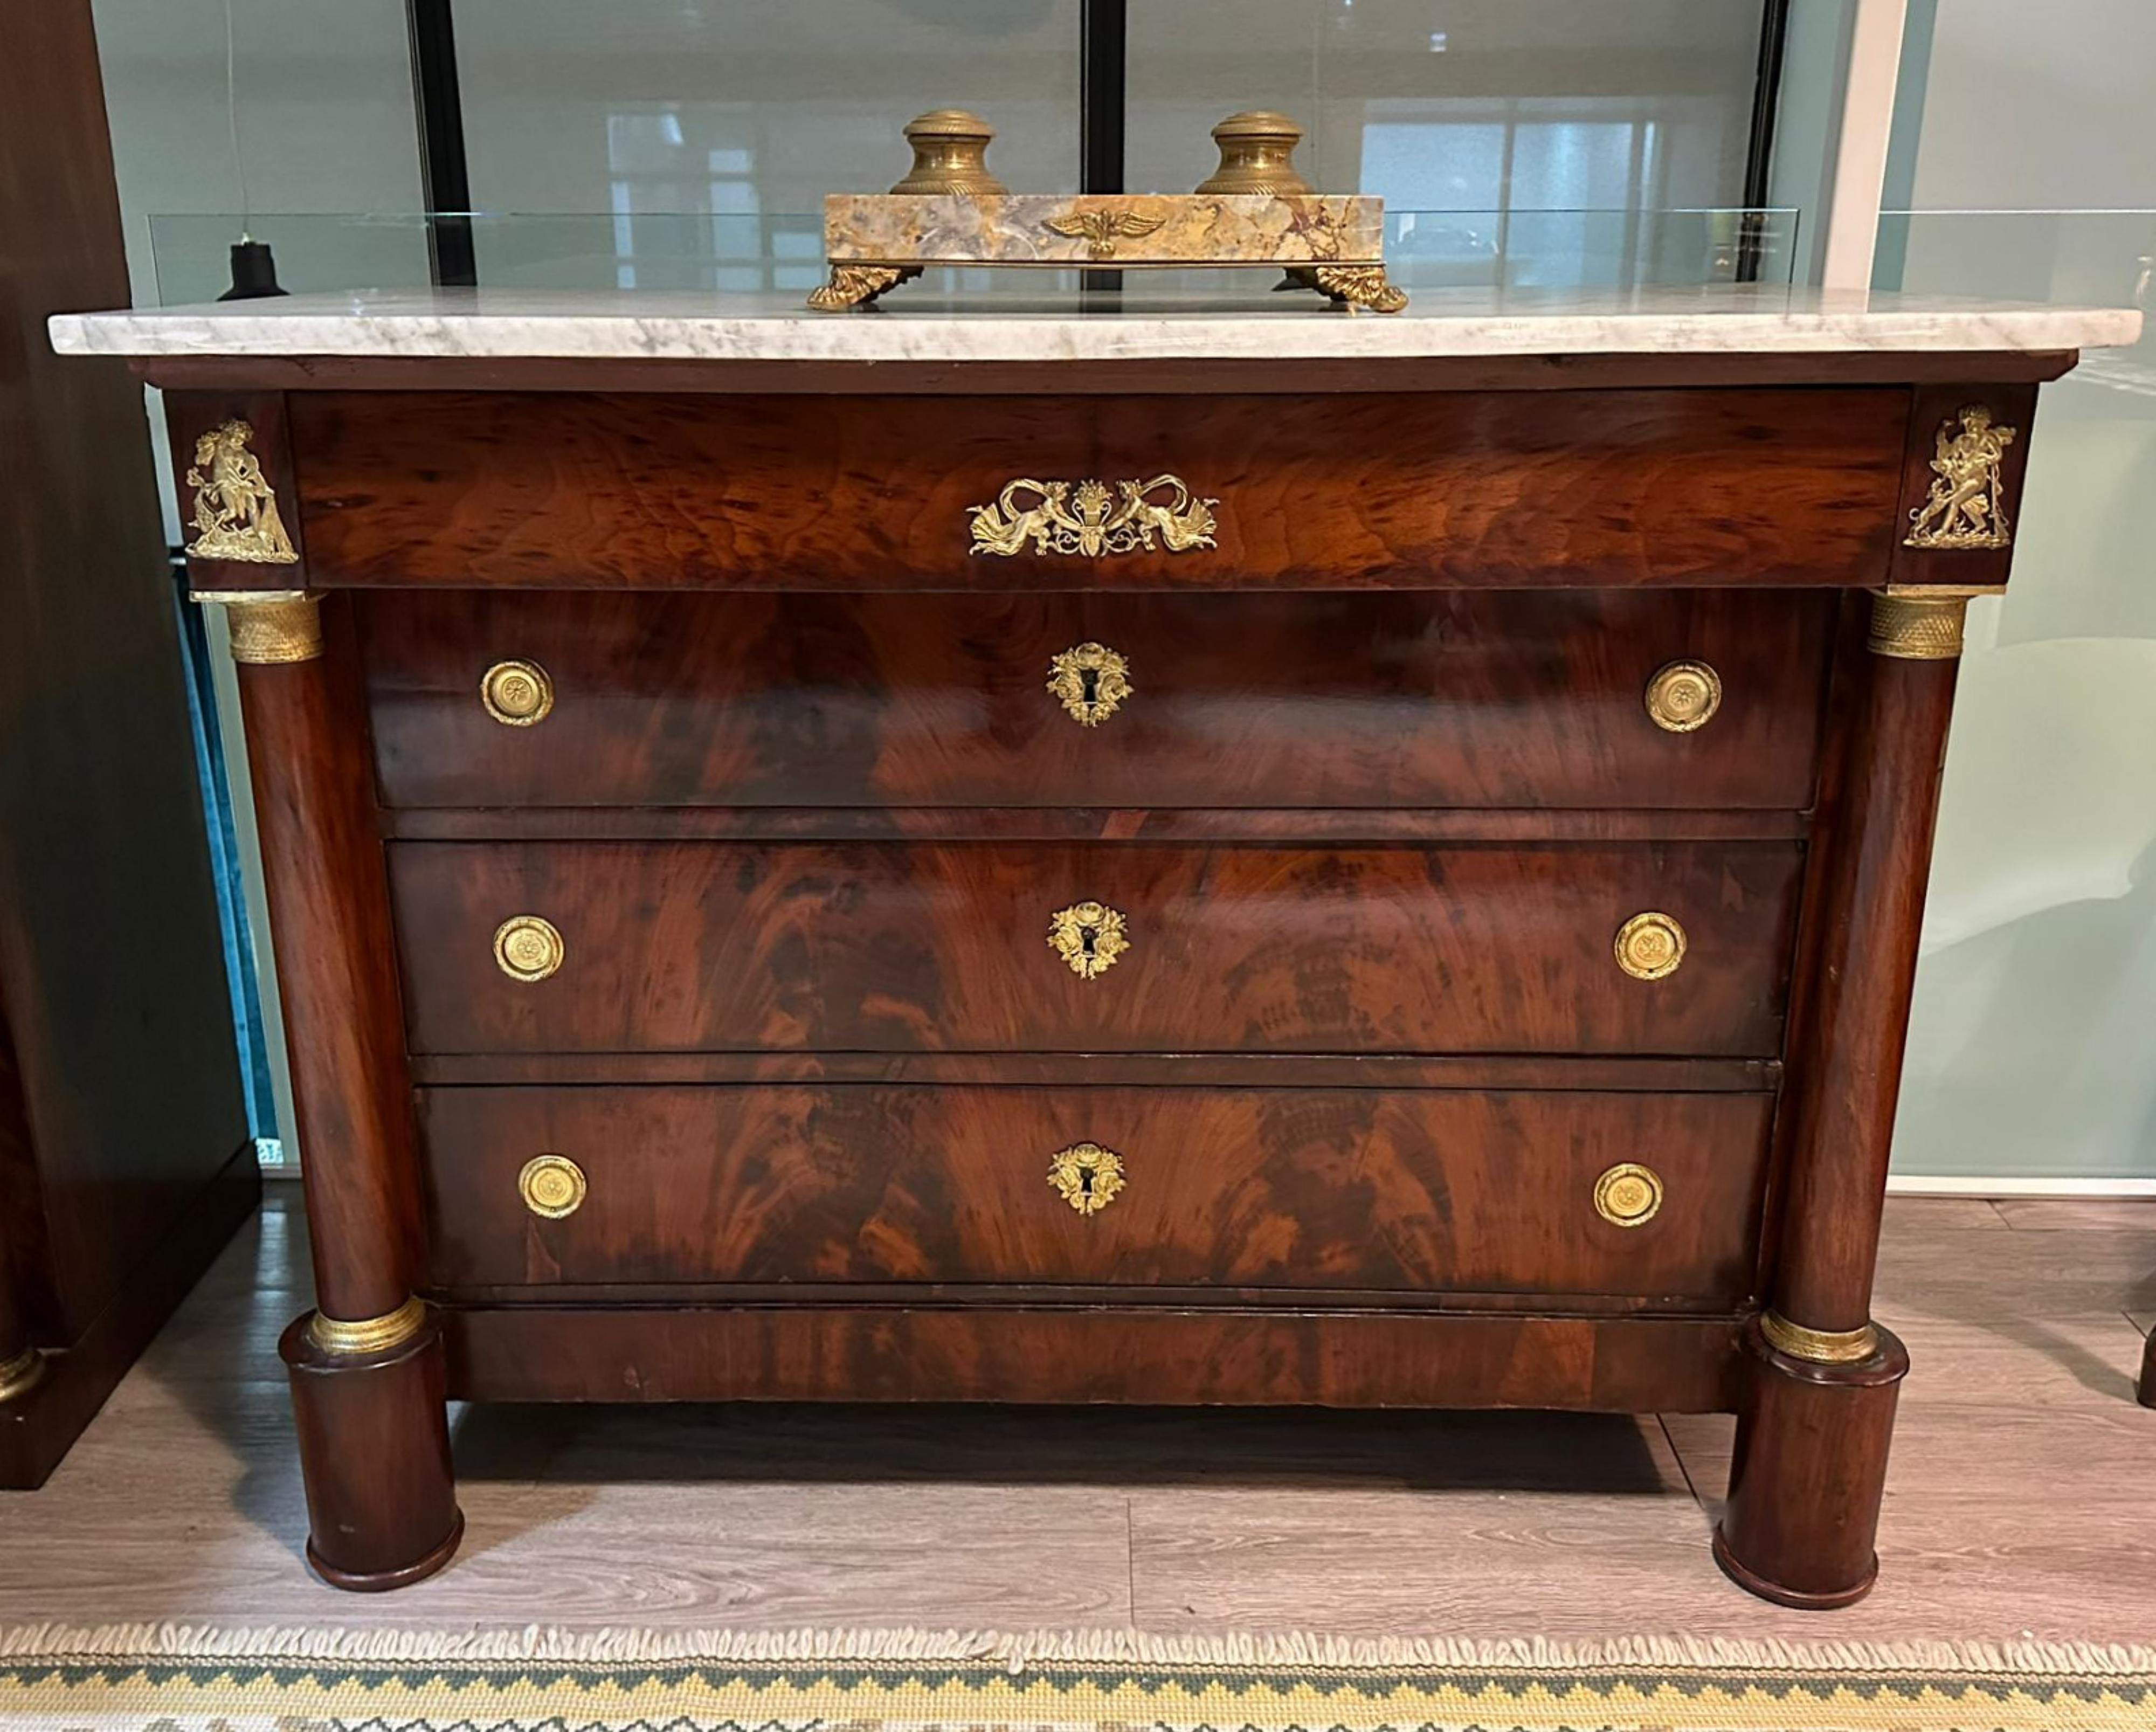 Title: French Empire Napoleon III Commode
Date/Period: 19th century
Dimension: 90cm x 63cm x 120cm
Materials: walnut wood and marble
Additional information: French. Empire Napoleon III style cabinet in walnut and marble (original) private colection